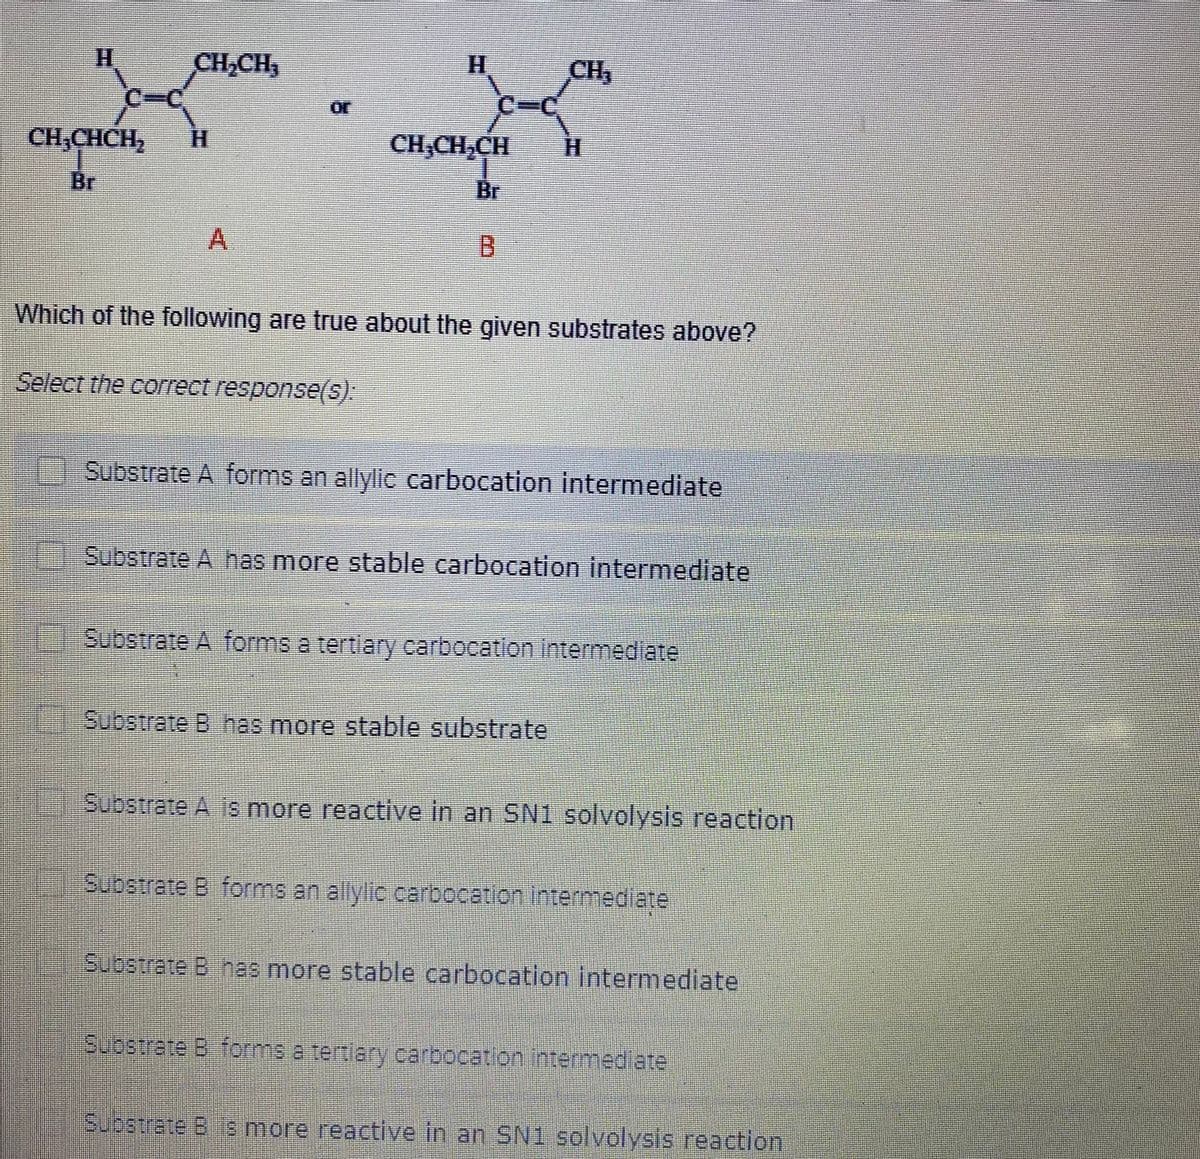 H.
CH,CH,
H.
CH,
C%3C
or
CH,CHCH,
H.
CH,CH,CH
H.
Br
Br
A.
Which of the following are true about the given substrates above?
Select the correct response(s).
Substrate A forms an allylic carbocation intermediate
Substrate A has more stable carbocation intermediate
Substrate A forms a tertlary carbocation intermedlate
Substrate B has more stable substrate
Substrate A 1s more reactive in an SN1 solvolysis reaction
Substrate B forms an allylic carbocation Intermediate
Substrate B has more stable carbocation intermediate
Substrate B forms a tertiary carbocation intermediate
Substrate B 8 more reactive in an SN1 solvolysis reaction
